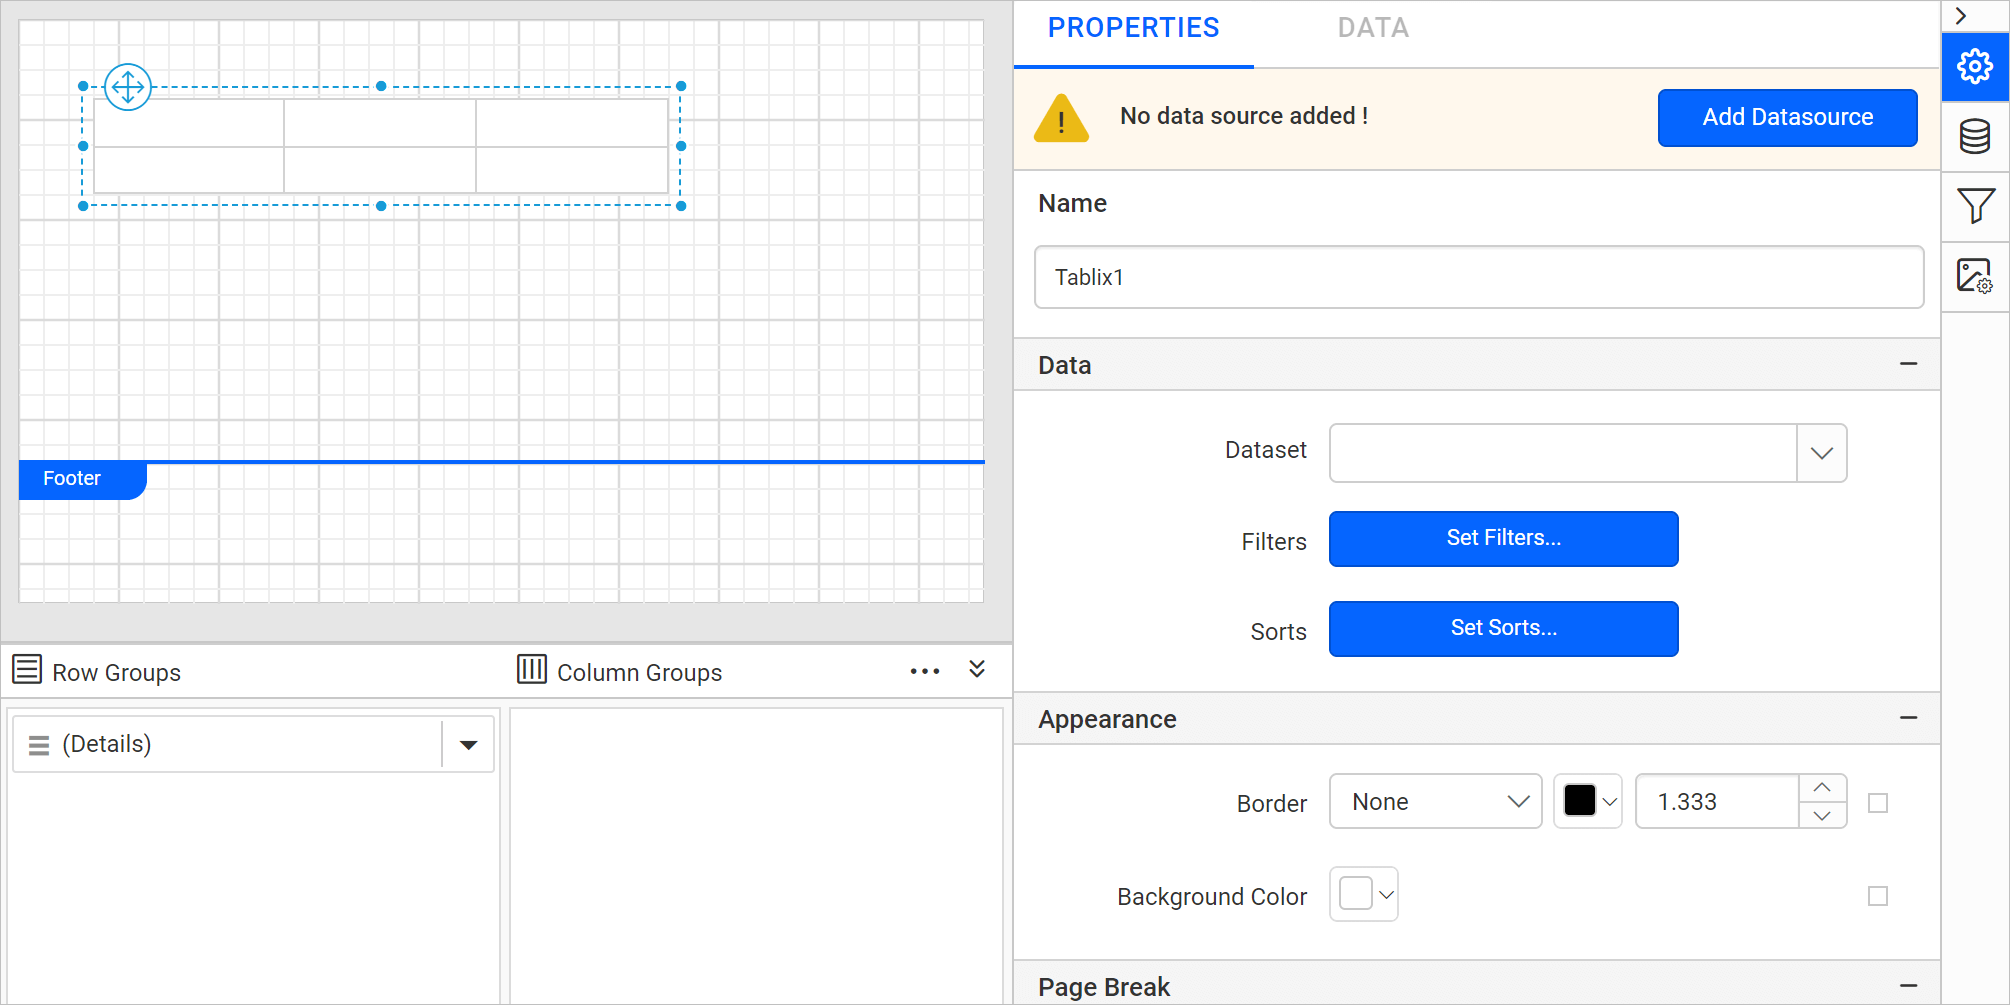 Tablix item with properties view